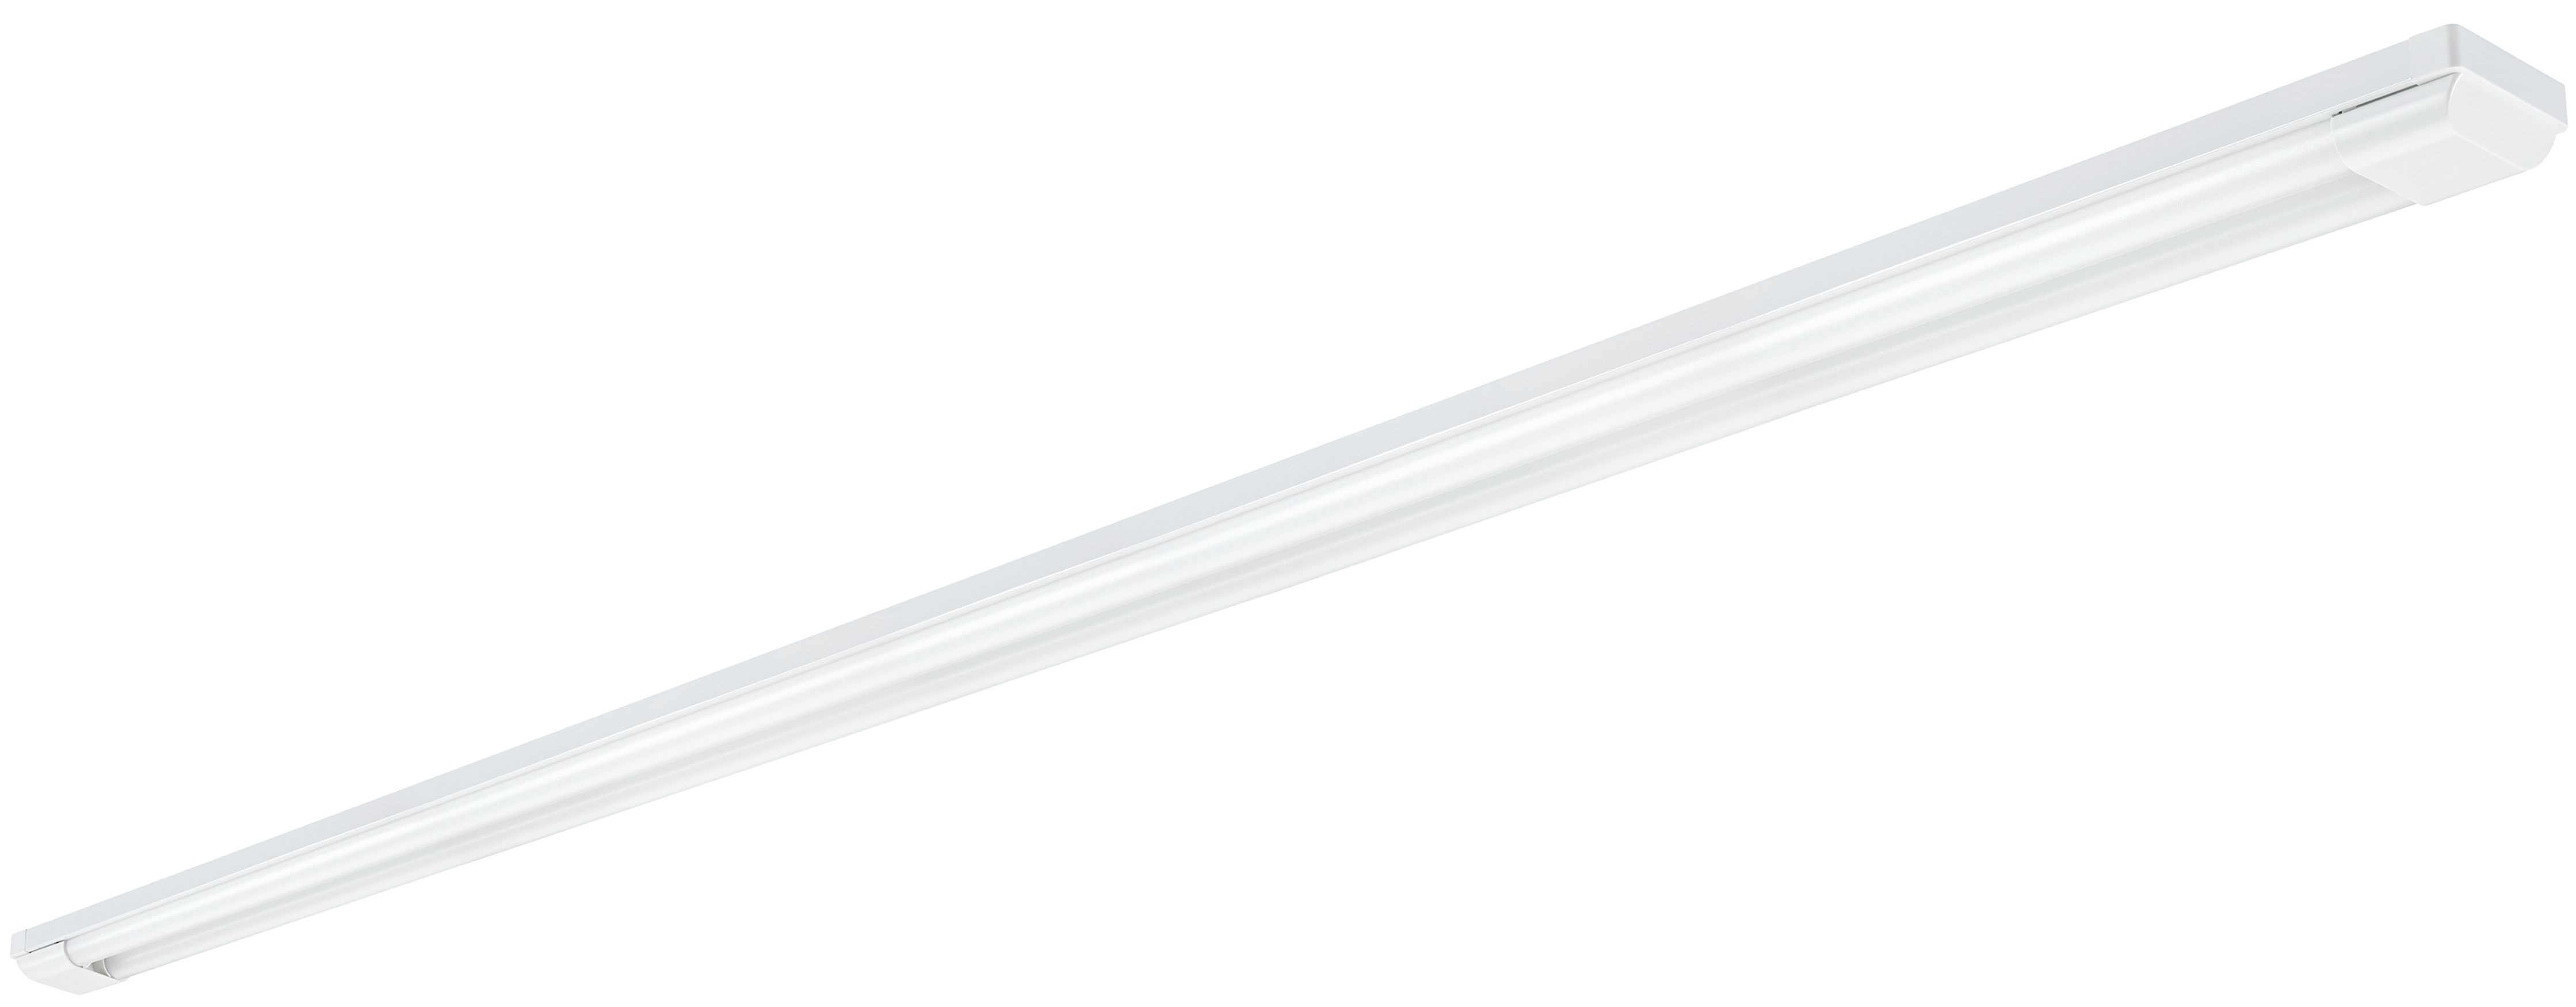 Sylvania Twin 6ft IP20 Light Fitting with T8 Integrated LED Tube - 48W